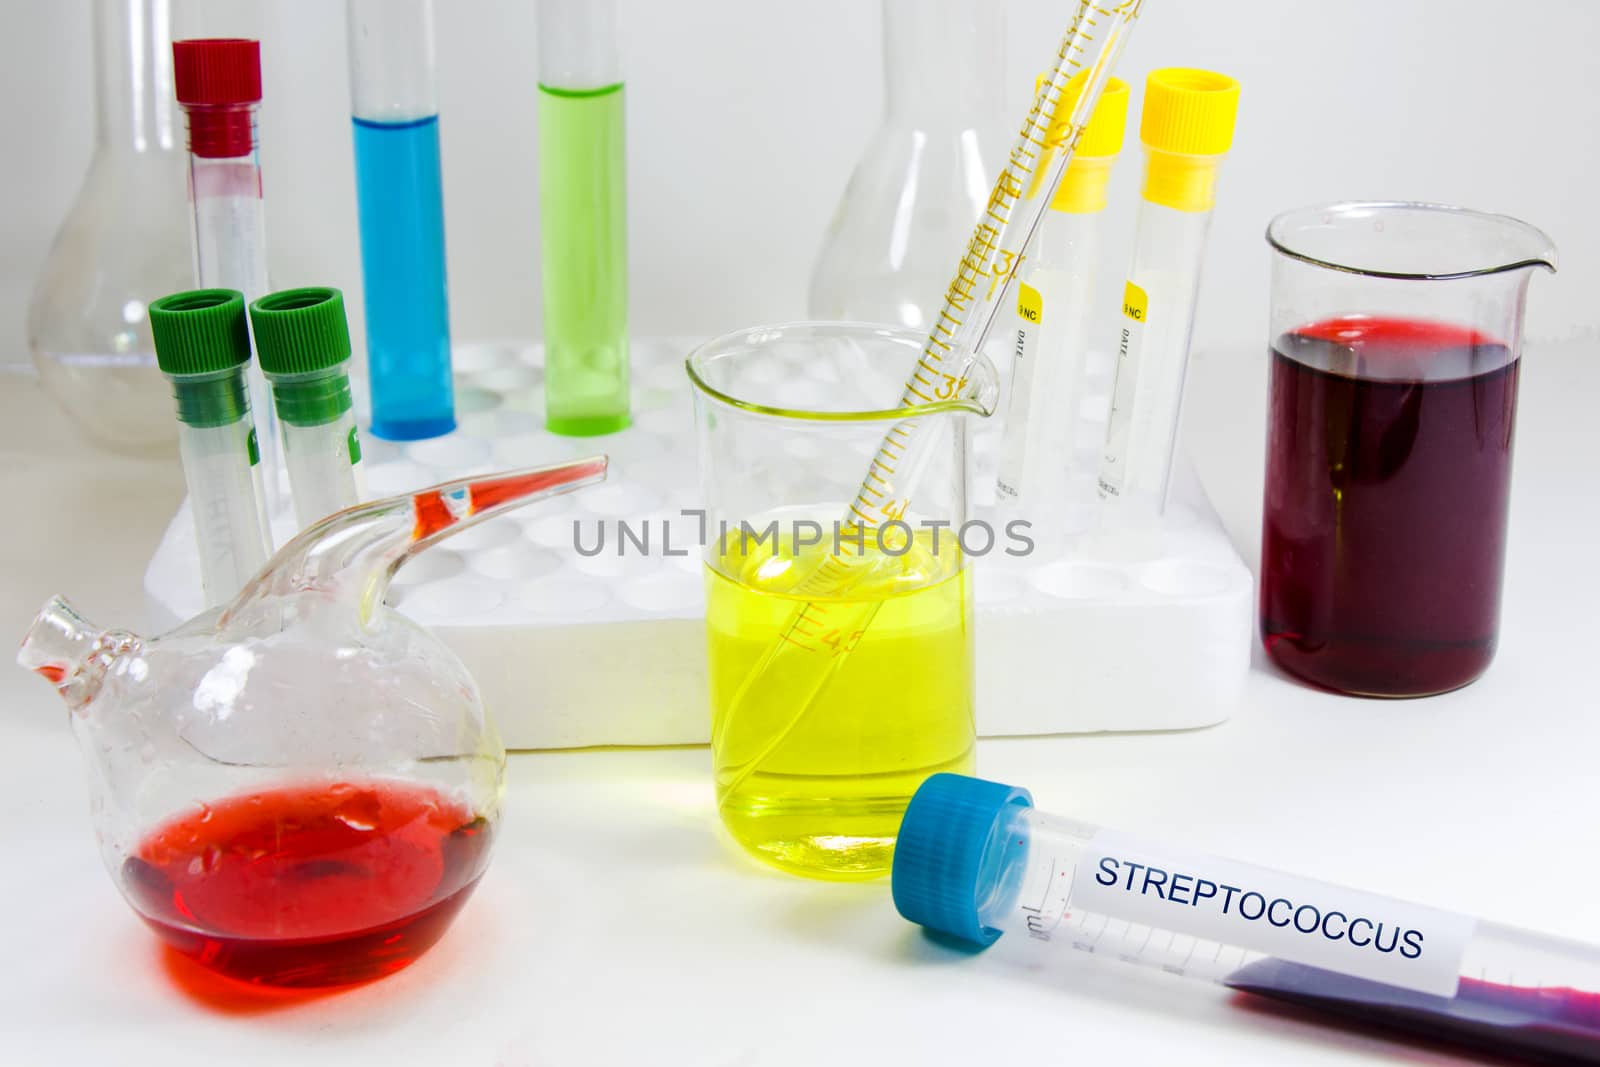 Streptococcus blood test tube, laboratory and chemical instruments, diagnoses and research by Taidundua